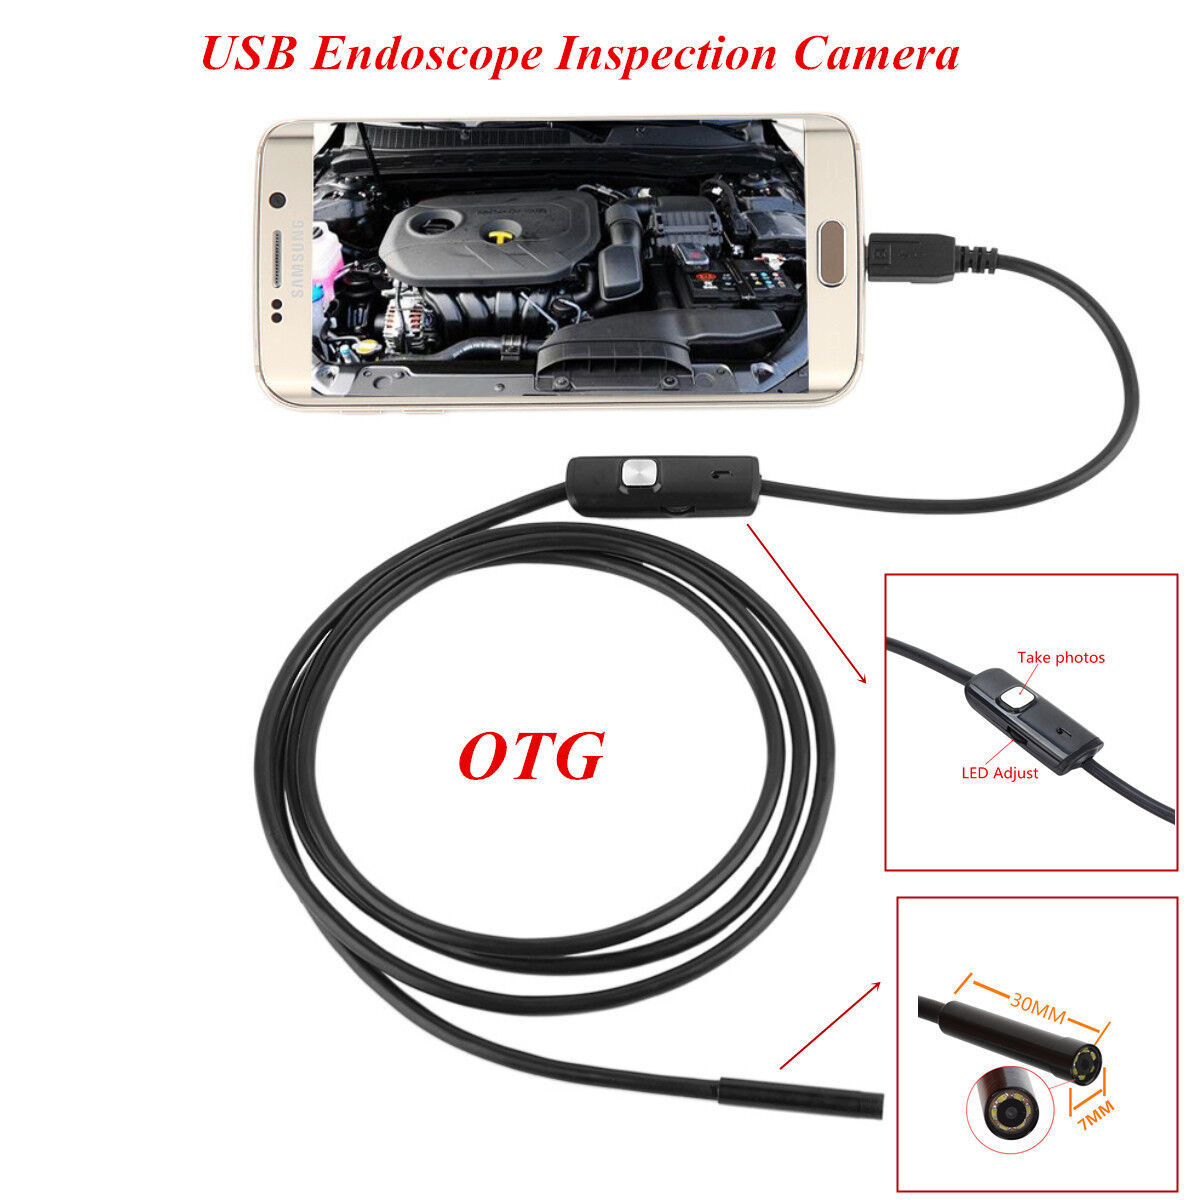 OTG 7mm USB Endoscope Inspection Camera Waterproof 6 LED Android For Car Engine